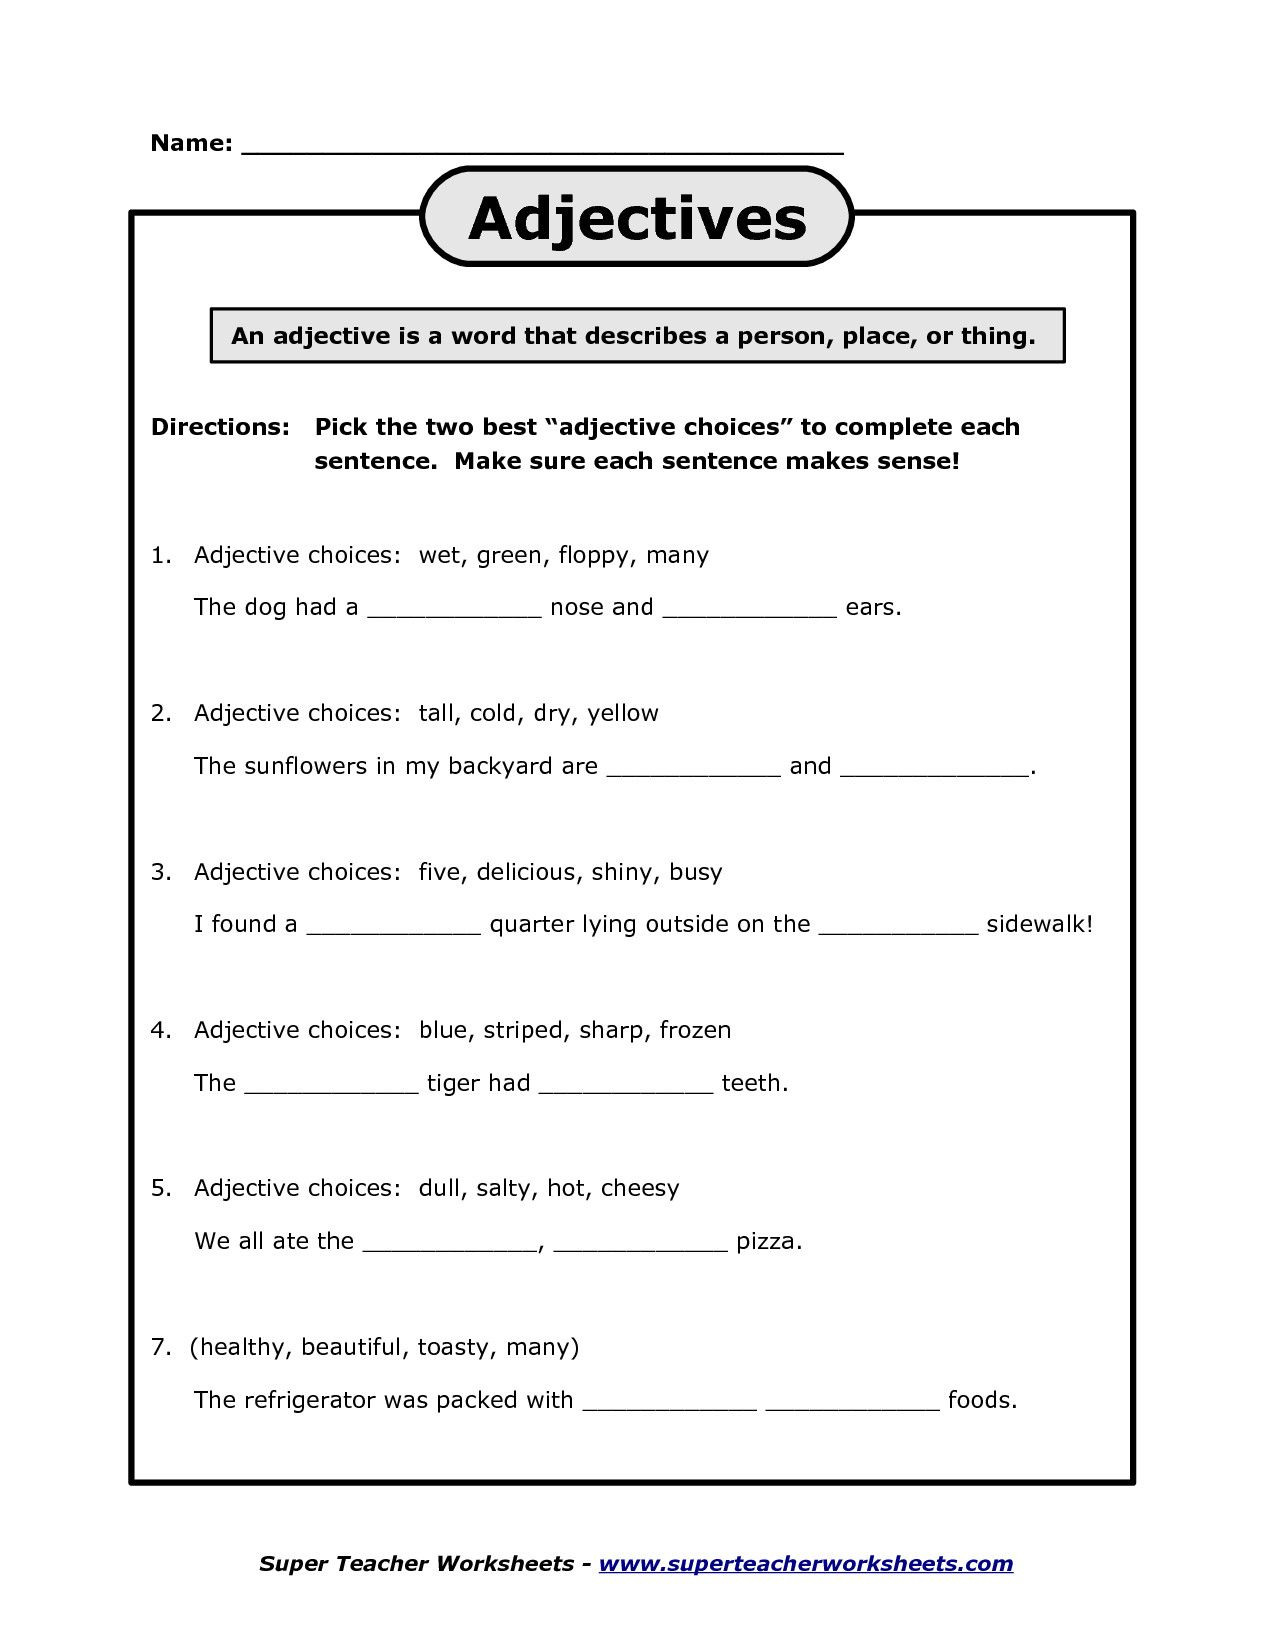 Adjectives Worksheet 3 Spanish Answers Db excel